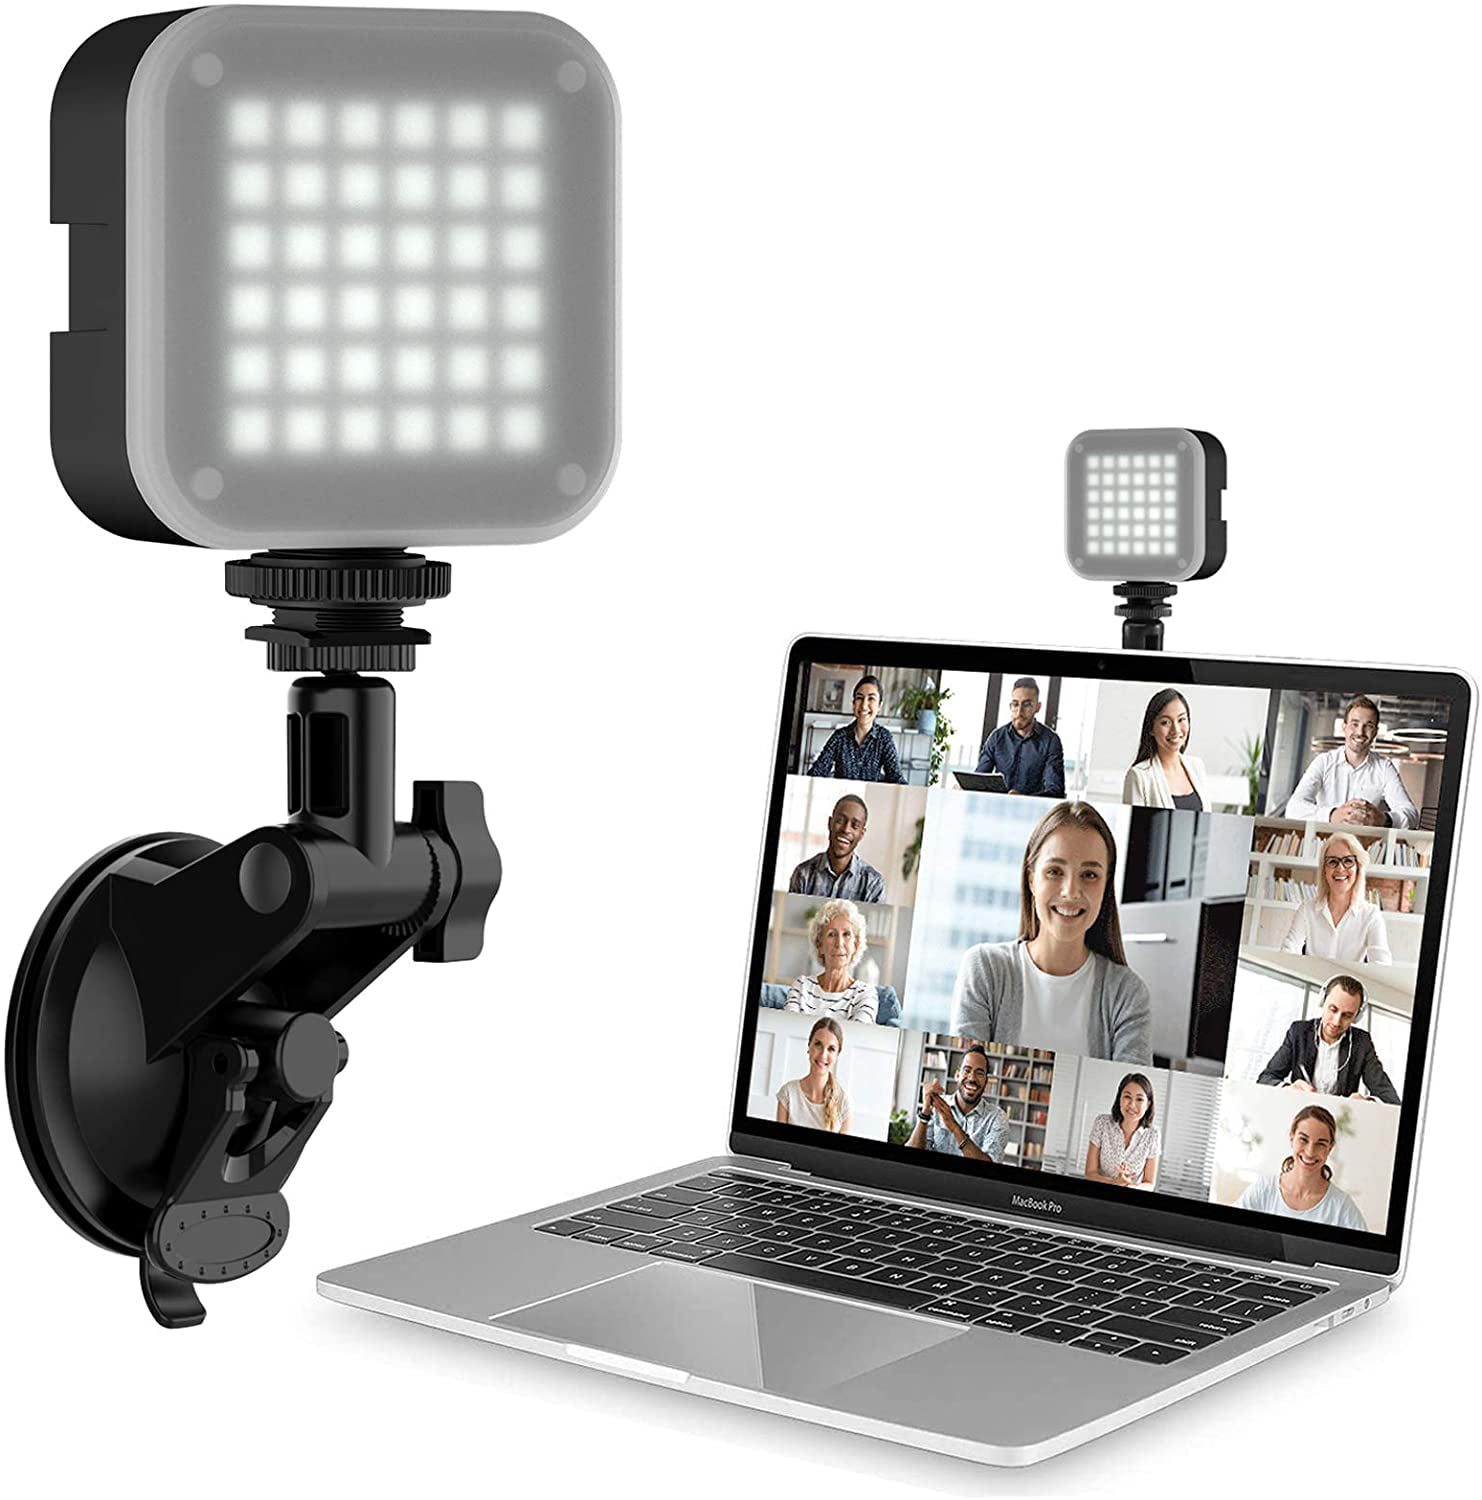 LED Ring Light Clip On for Laptop and Computers Monitors for Remote Working Distance Learning Meeting Light 4.5 Zoom Lighting Rayiou Video Conference Lighting Kit Computer Laptop Video Conf Self Broadcasting and Live Streaming Webcam and Zoom Calls 